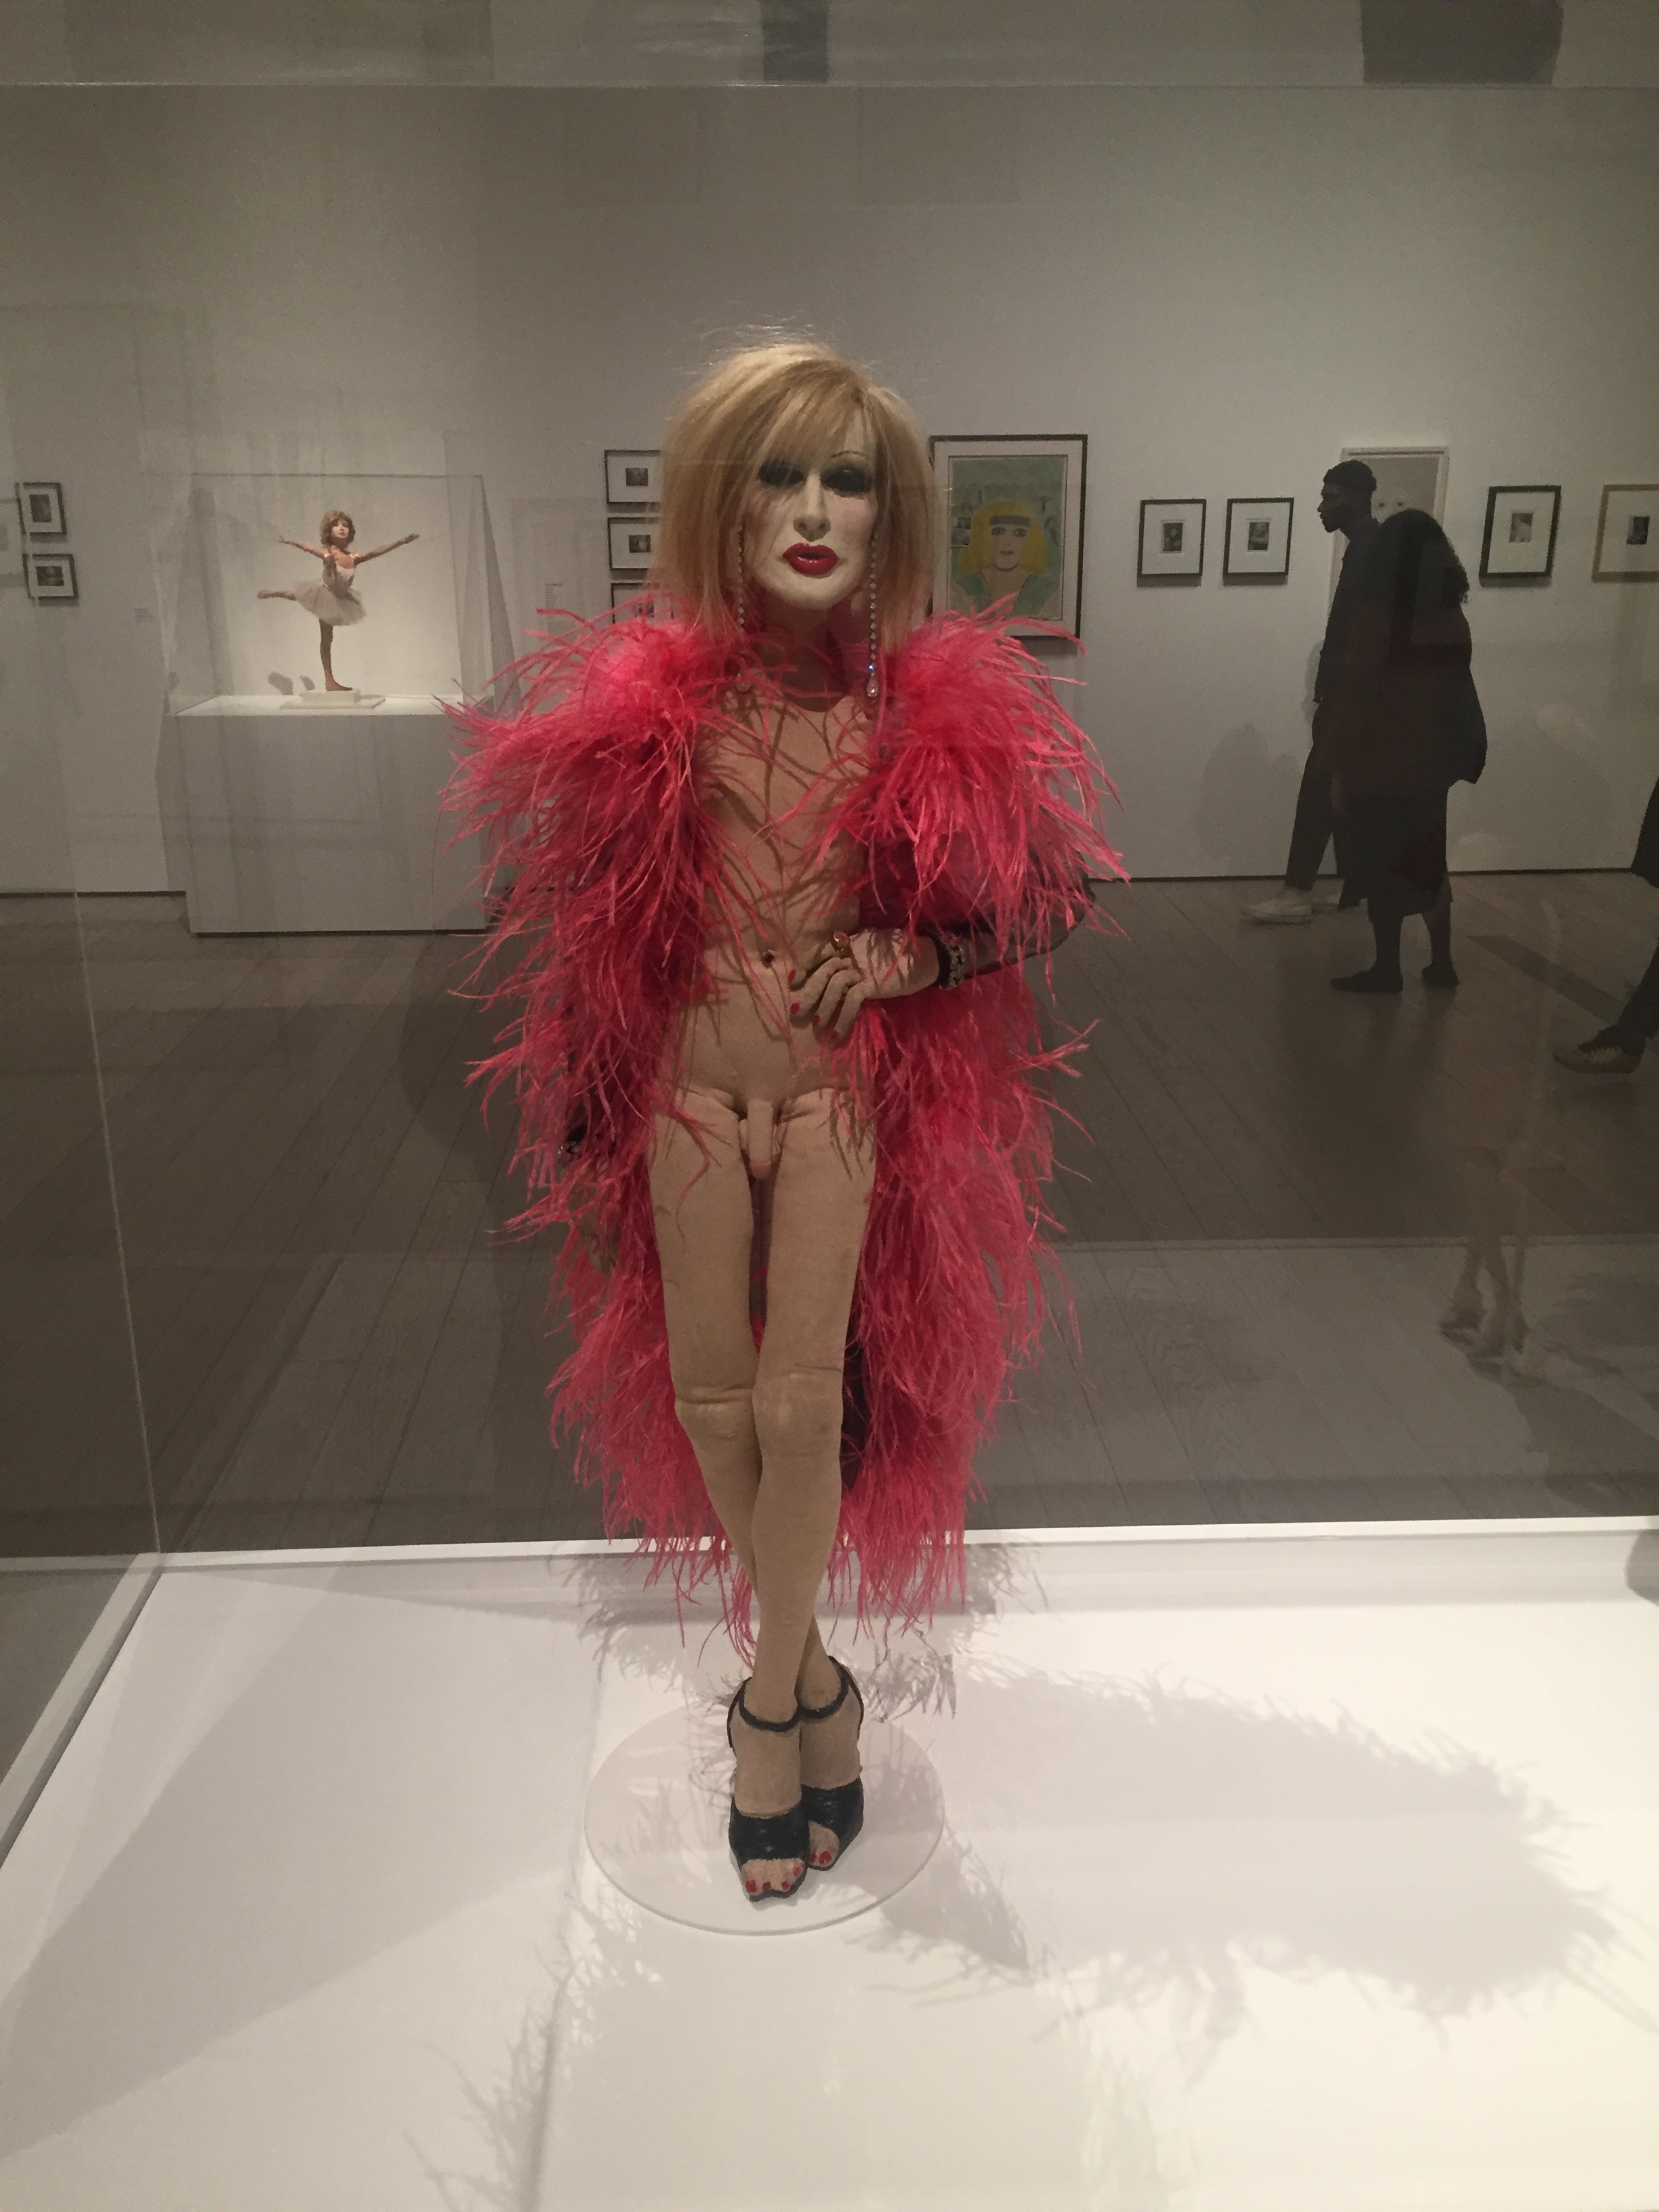 Candy Darling by Greer Lankton